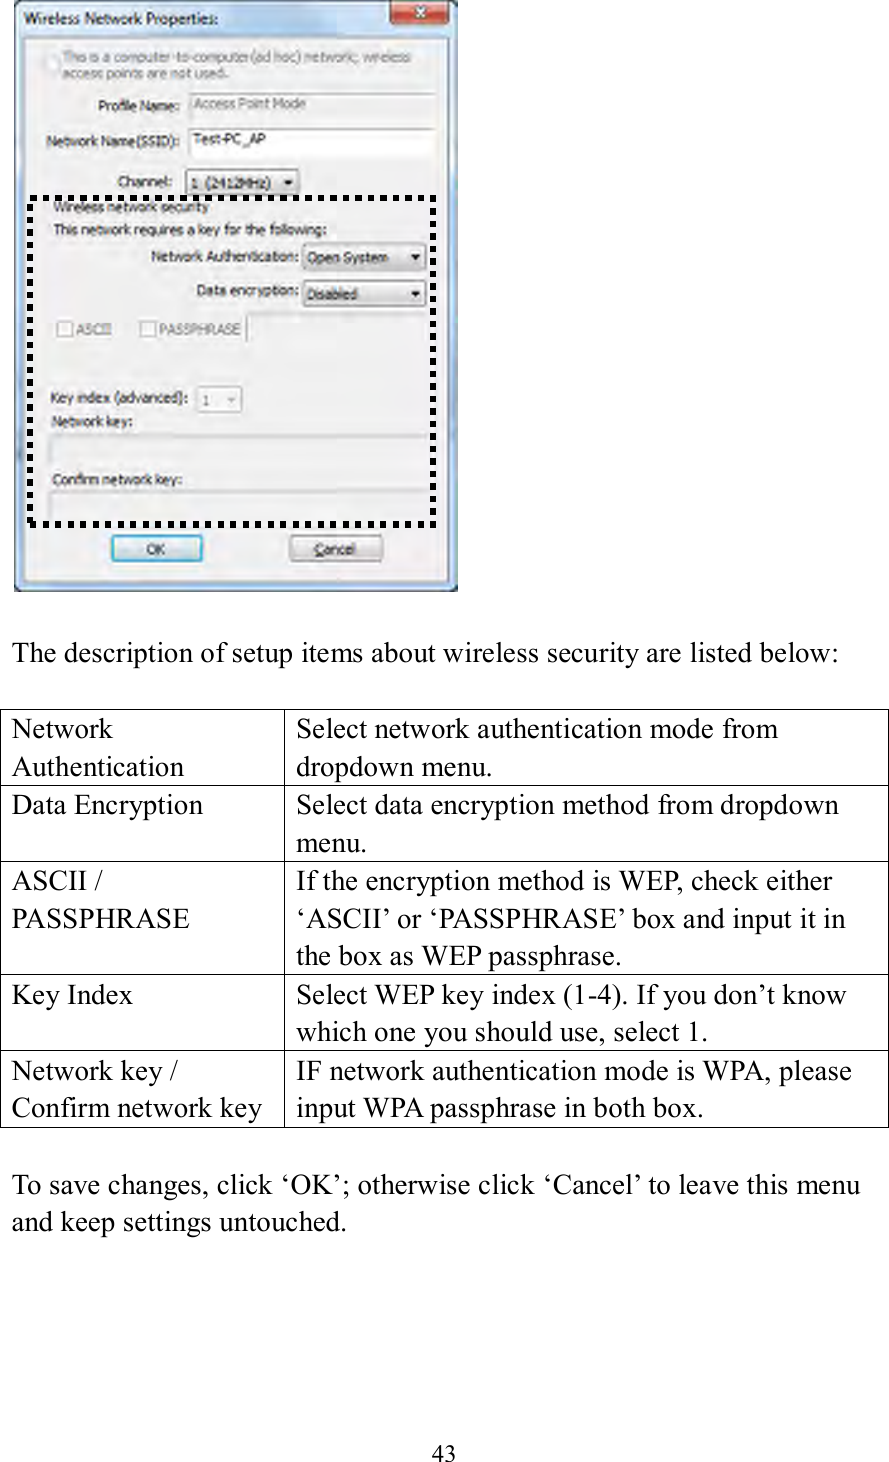 43    The description of setup items about wireless security are listed below:  Network Authentication Select network authentication mode from dropdown menu. Data Encryption Select data encryption method from dropdown menu. ASCII / PASSPHRASE If the encryption method is WEP, check either ‘ASCII’ or ‘PASSPHRASE’ box and input it in the box as WEP passphrase. Key Index Select WEP key index (1-4). If you don’t know which one you should use, select 1. Network key / Confirm network key IF network authentication mode is WPA, please input WPA passphrase in both box.  To save changes, click ‘OK’; otherwise click ‘Cancel’ to leave this menu and keep settings untouched.      